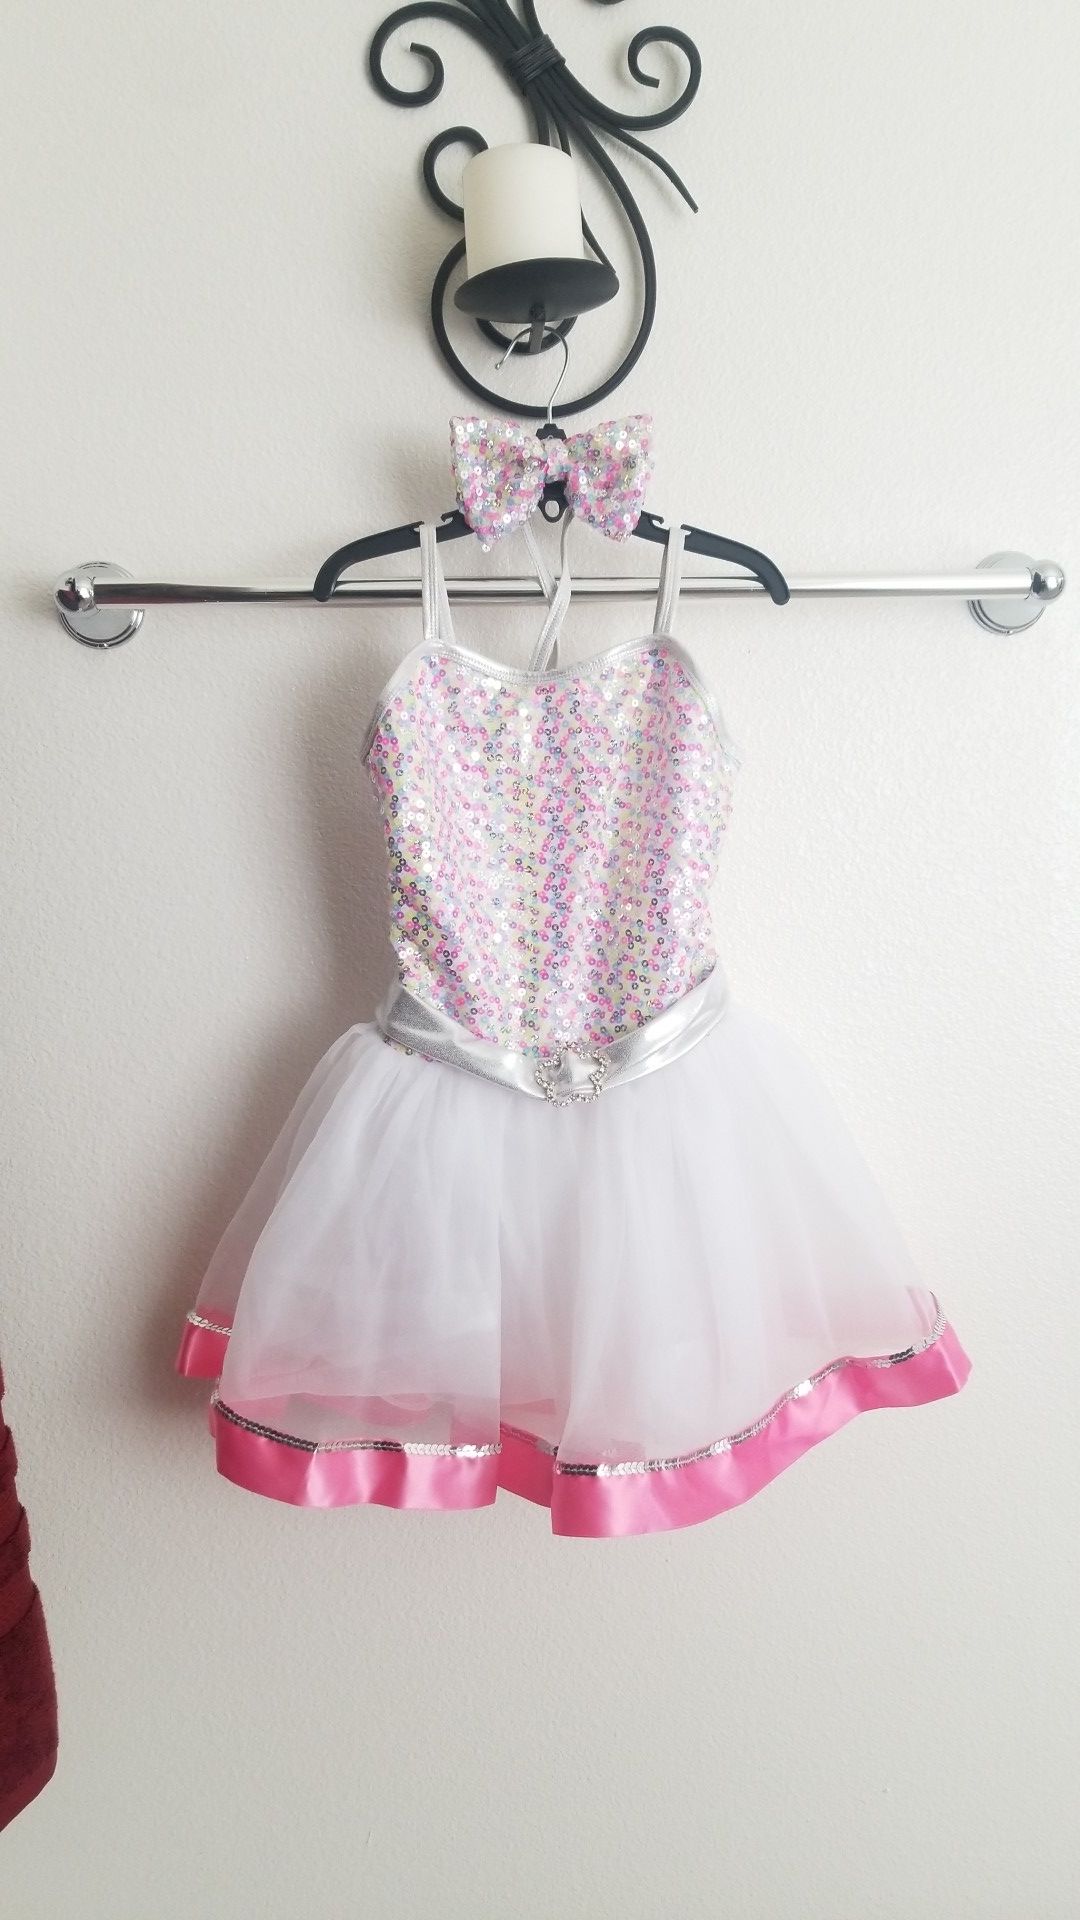 Dance, theatrical costume sequined tutu dress sz IC, intermediate s 6x with head band bow